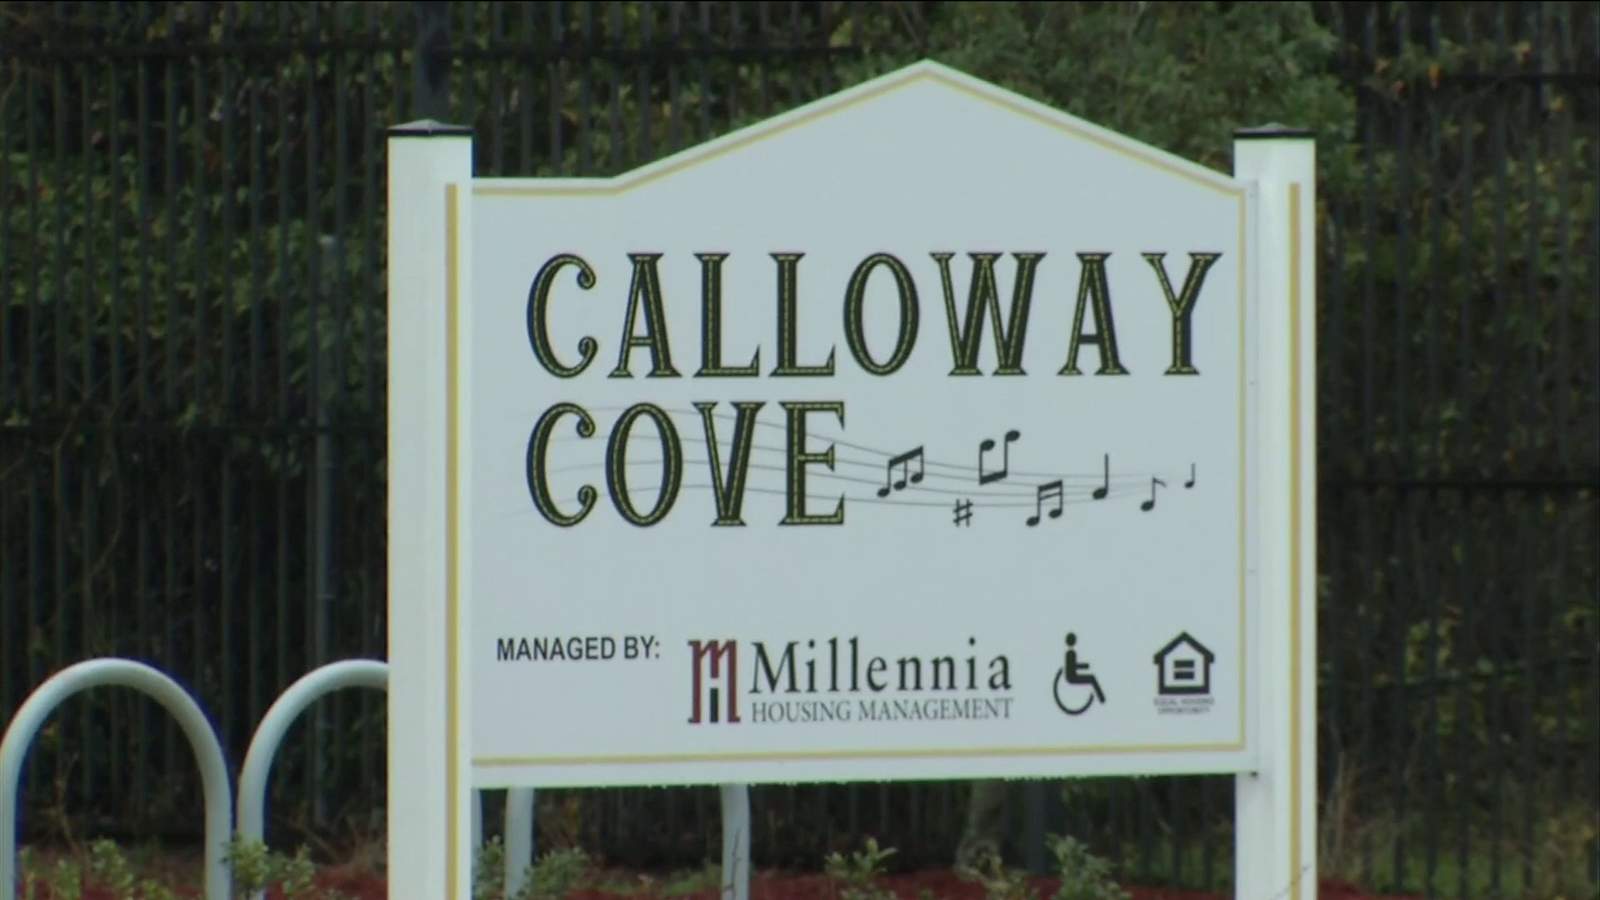 Man killed overnight at Calloway Cove; 4th killed there this week